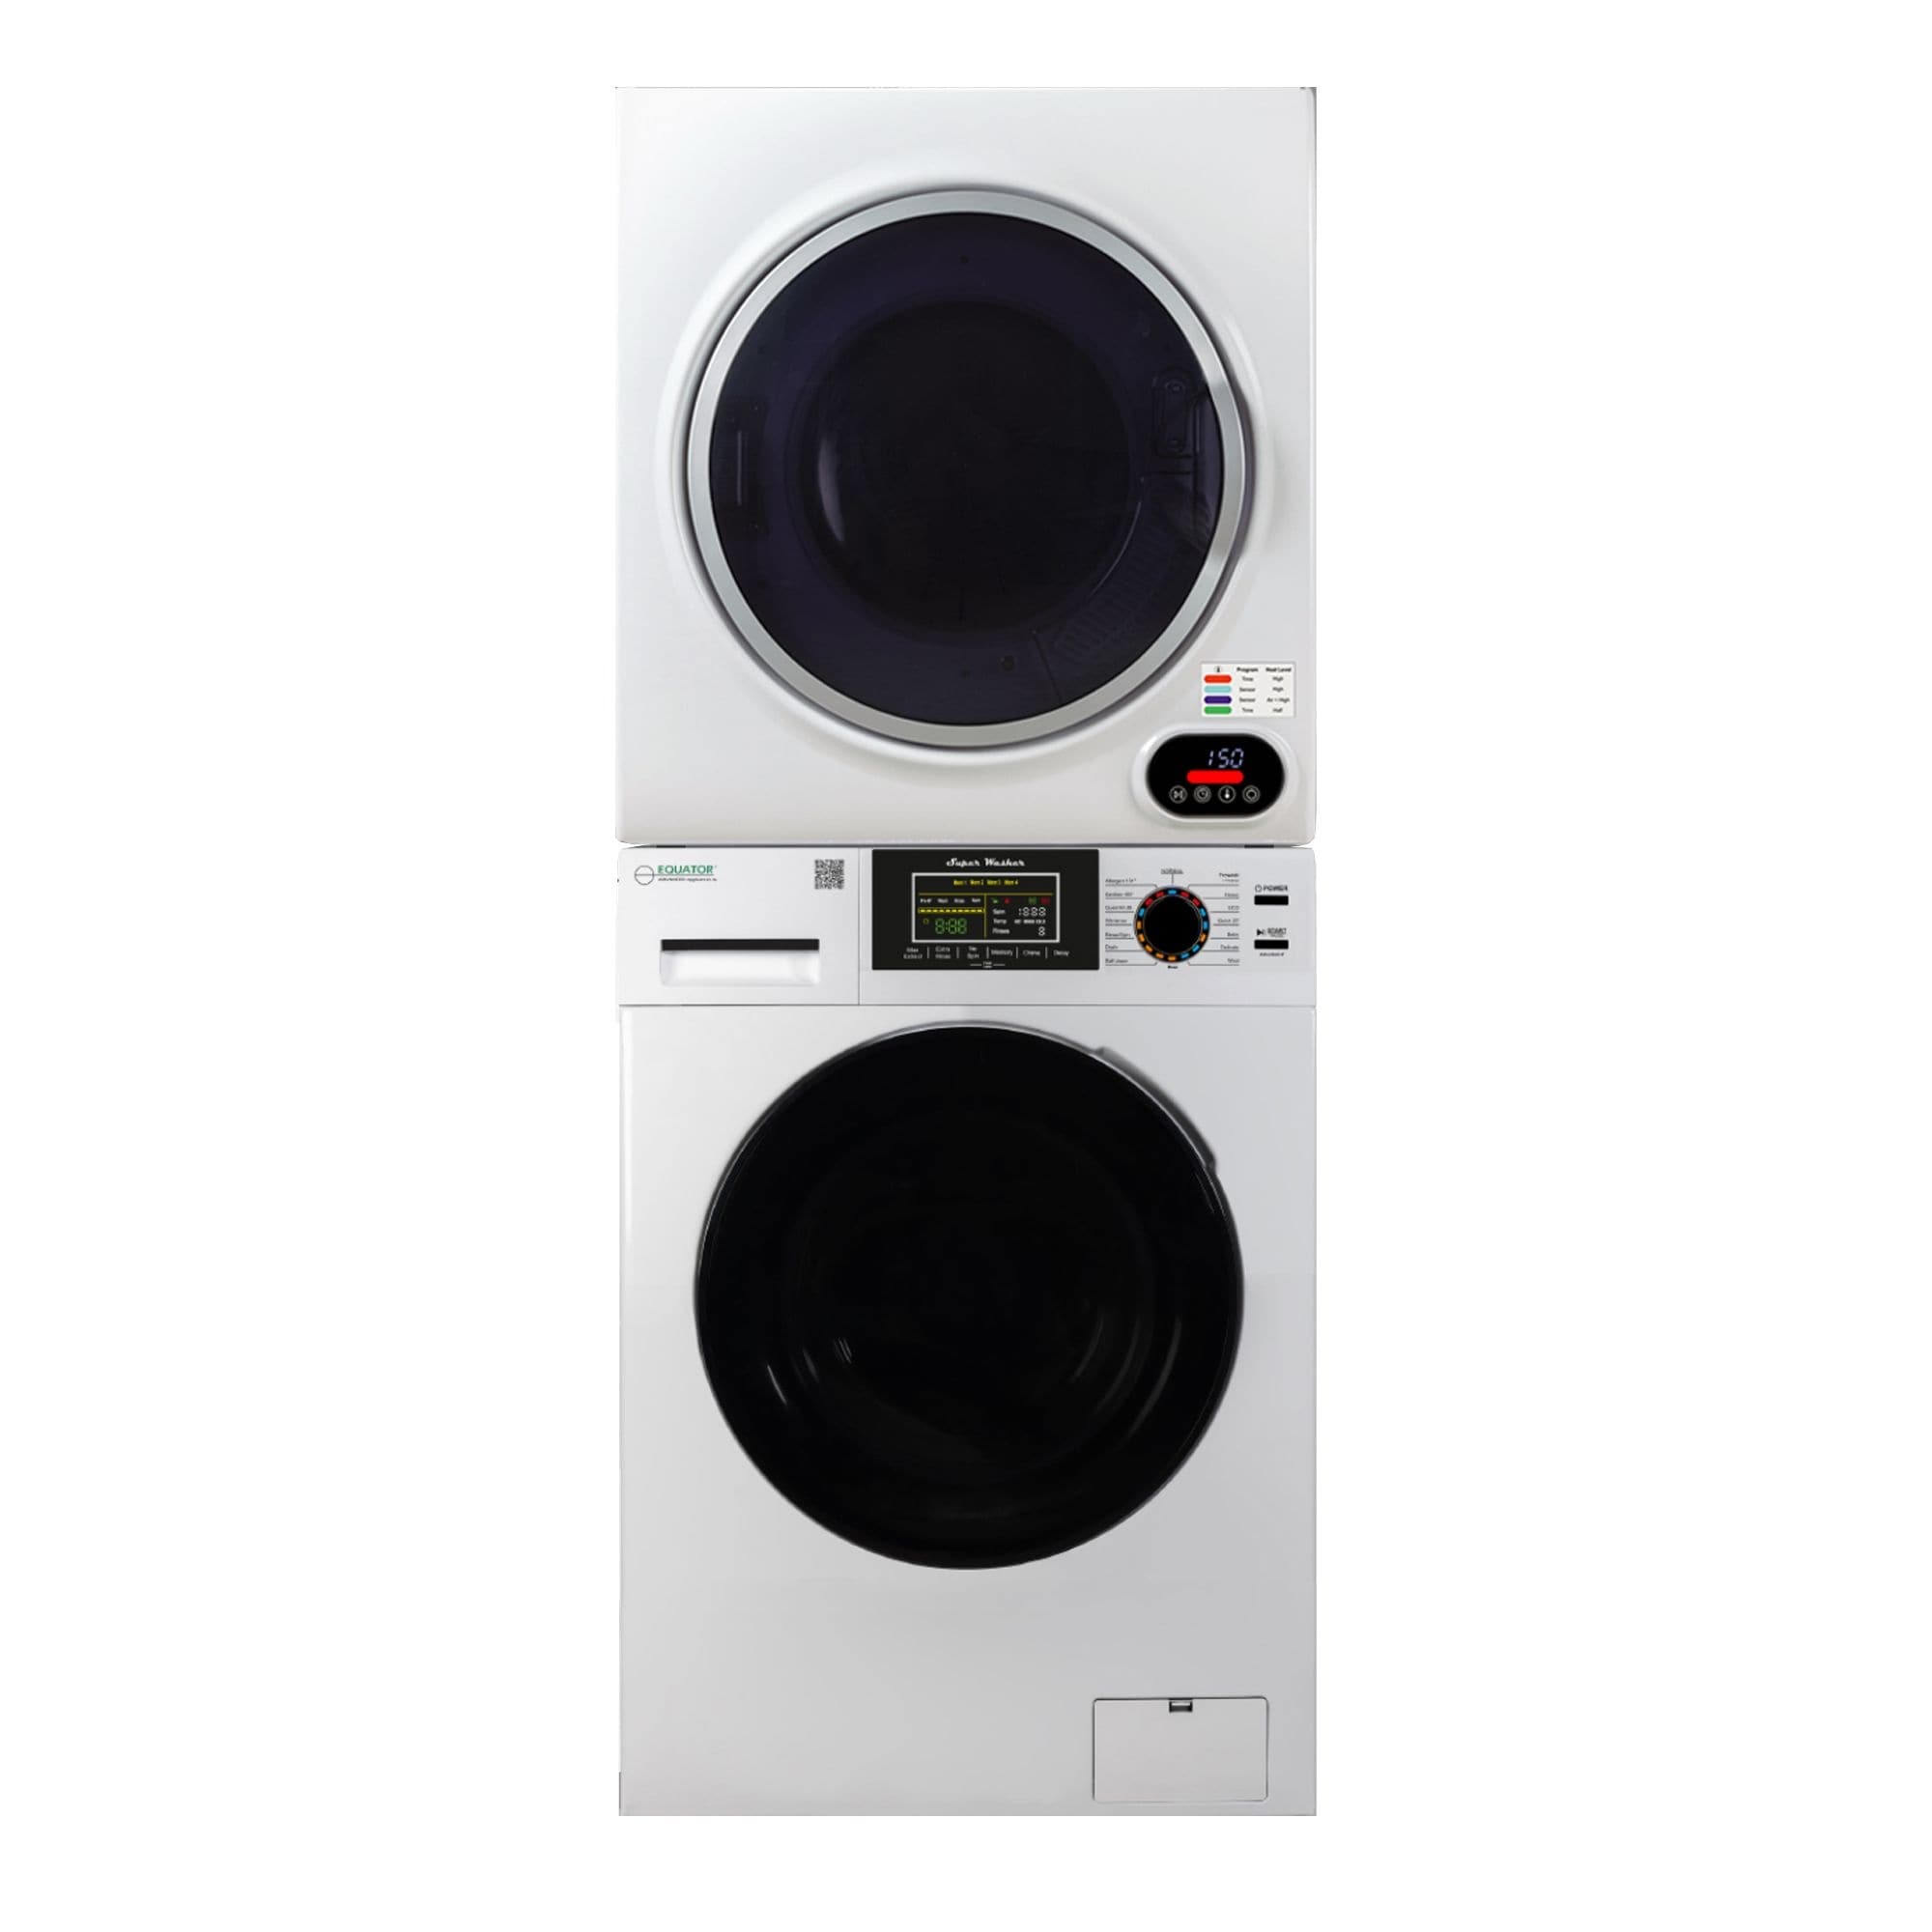 https://ak1.ostkcdn.com/images/products/is/images/direct/fc0f02e27707522e63ea7cccd4f8cebd0ab3195e/Equator-1.9cf-110V-Washer-and-4cf-220V-Vented-Sensor-Dryer-with-Reversible-door.jpg